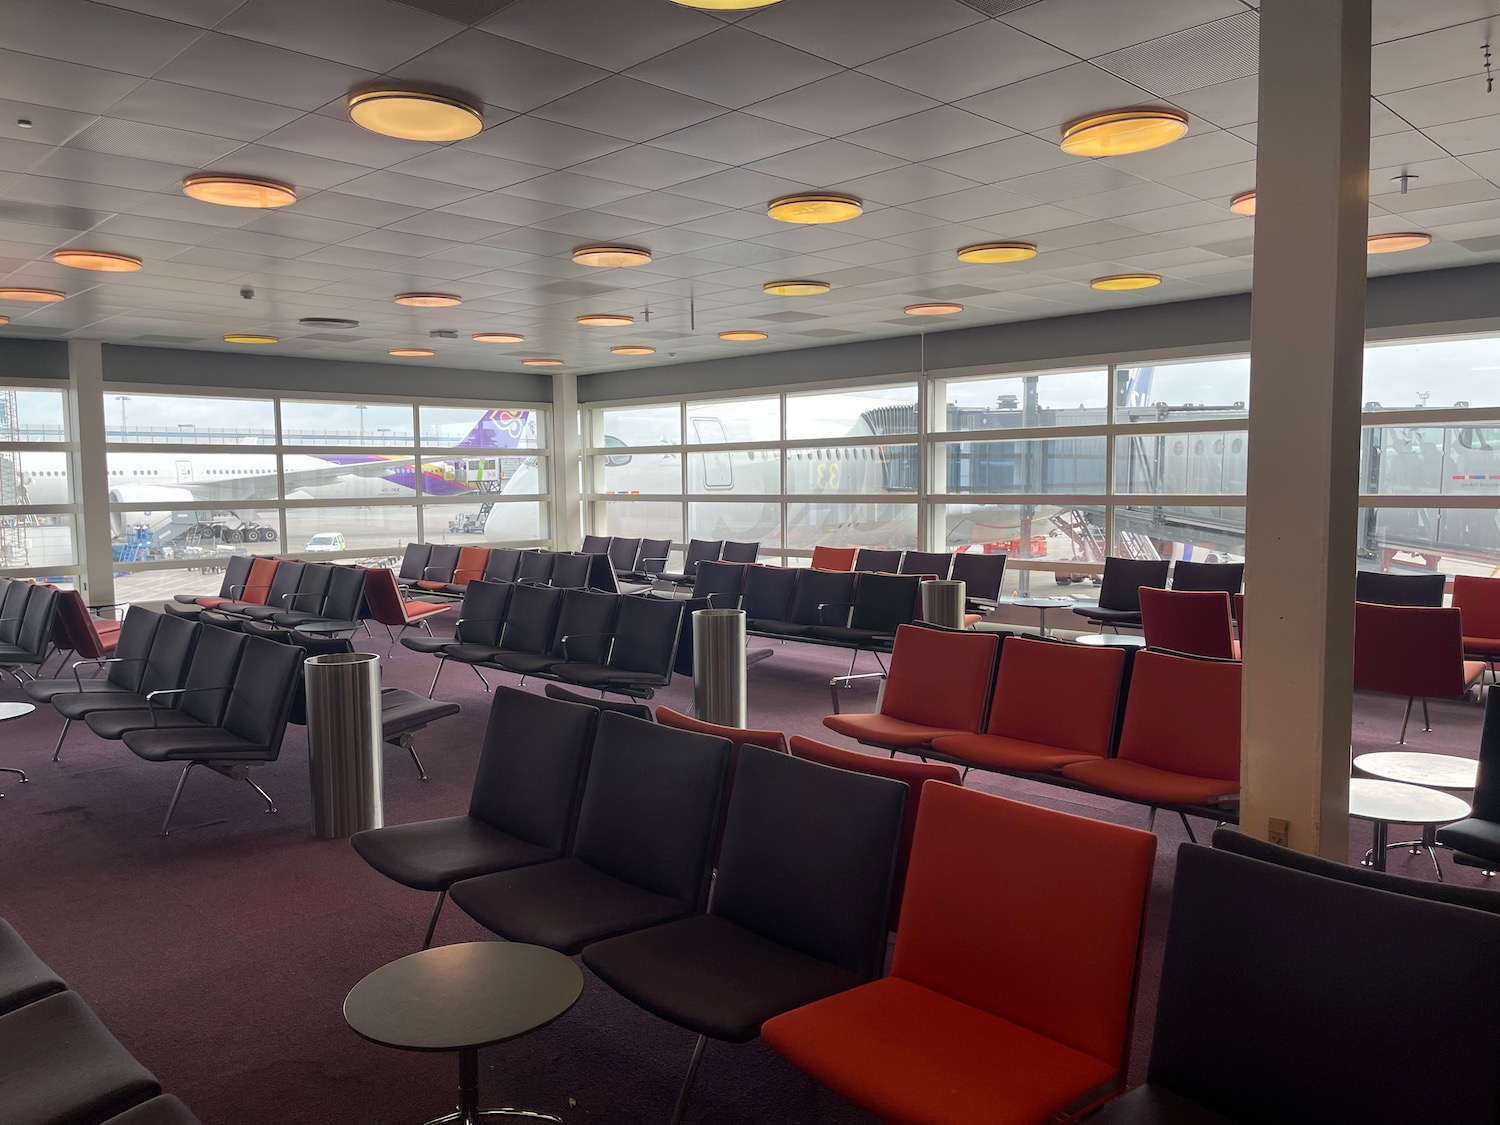 a row of chairs in an airport terminal